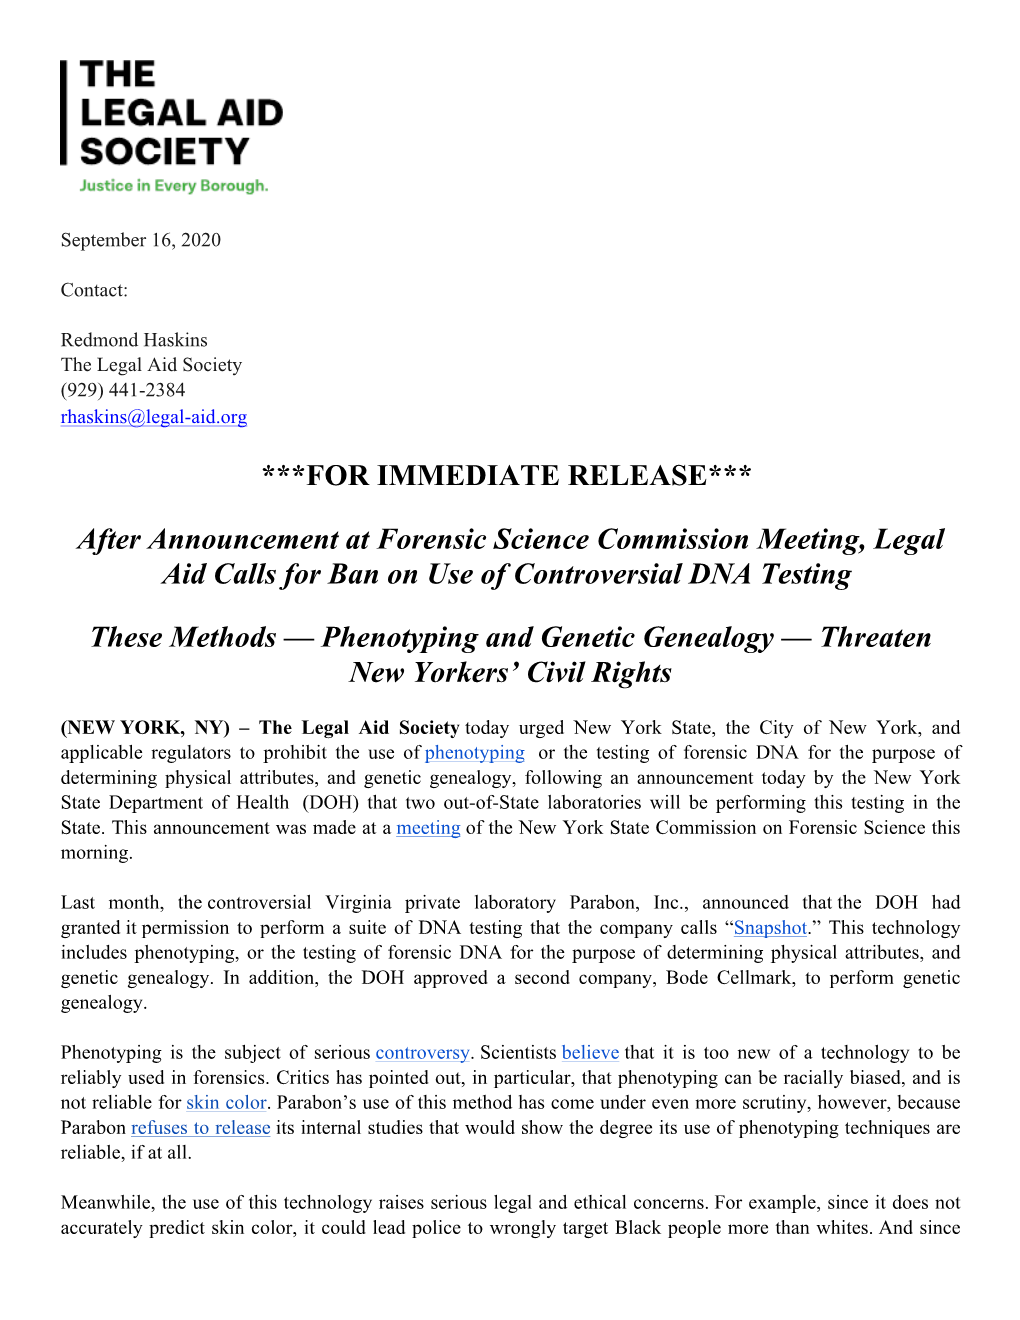 FOR IMMEDIATE RELEASE*** After Announcement at Forensic Science Commission Meeting, Legal Aid Calls for Ban on Use of Controv